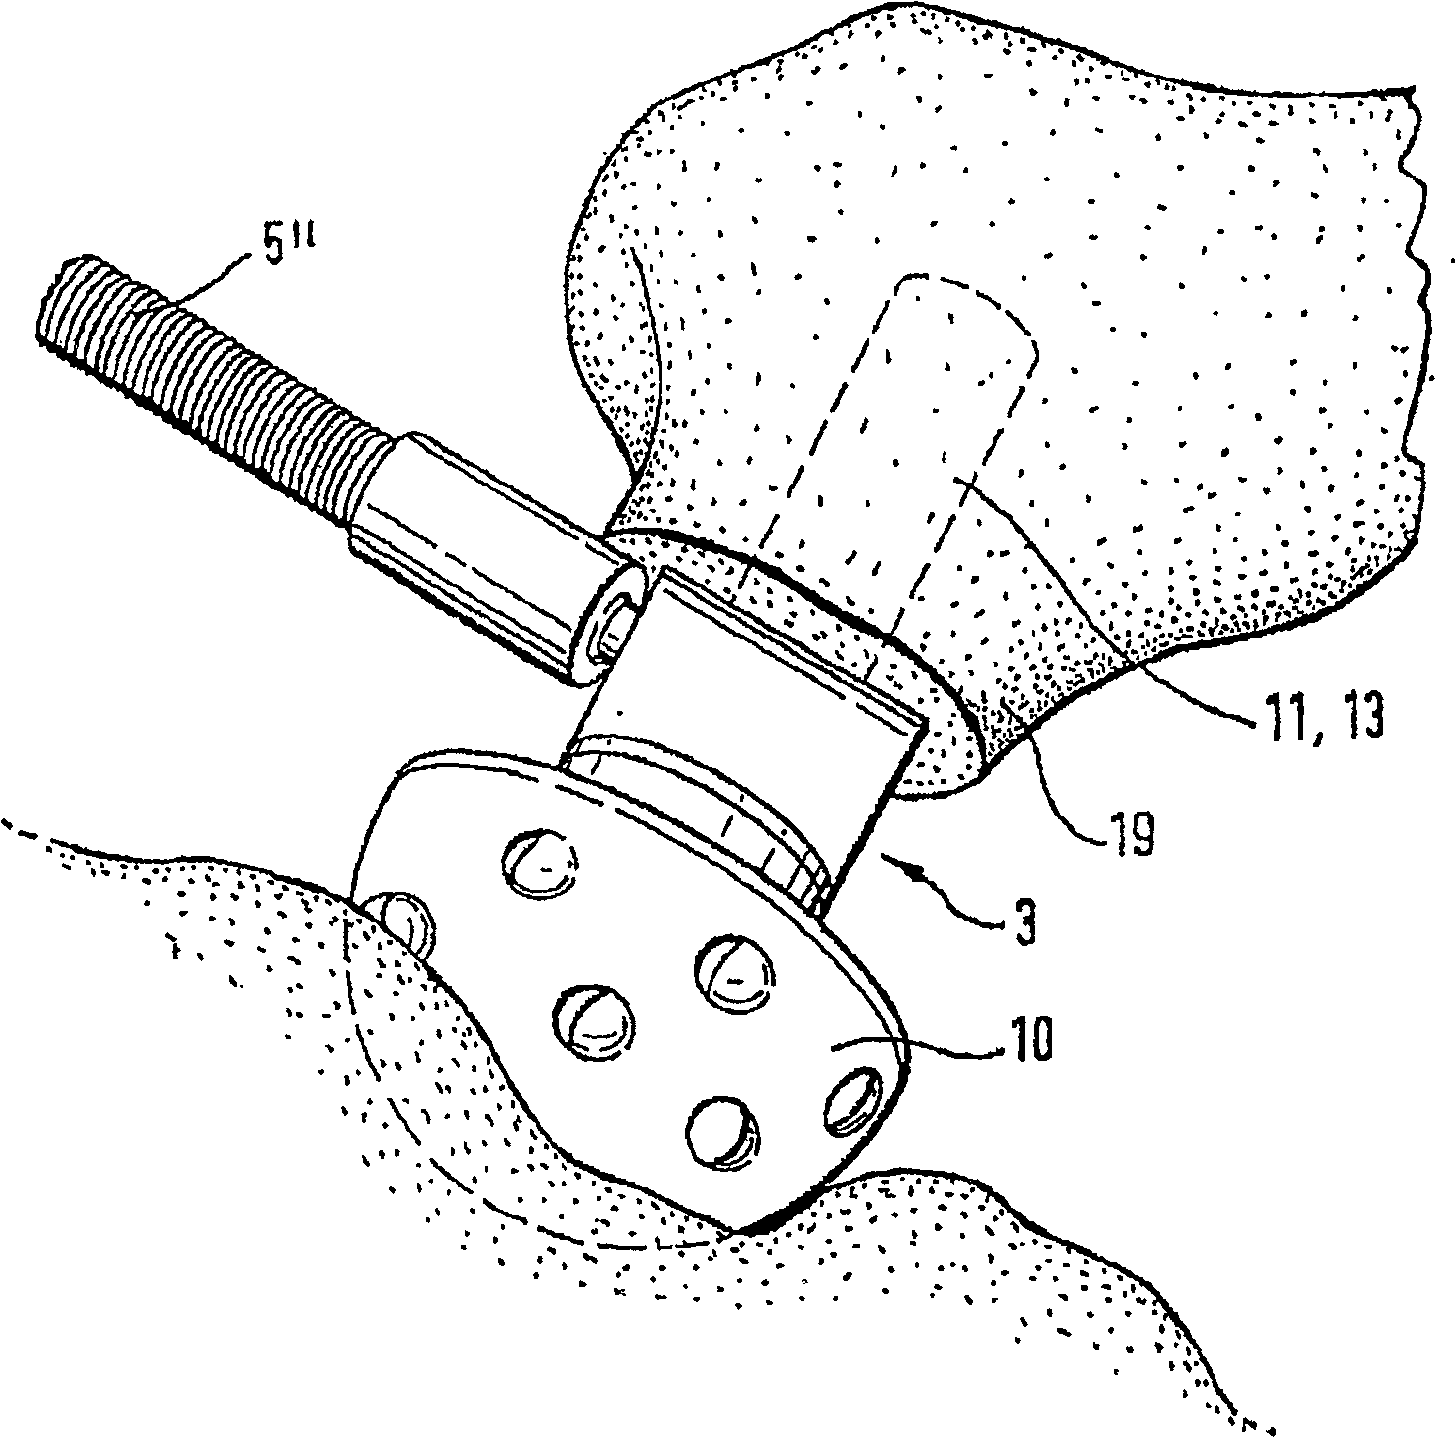 Surgical appliance for milling acetabulum